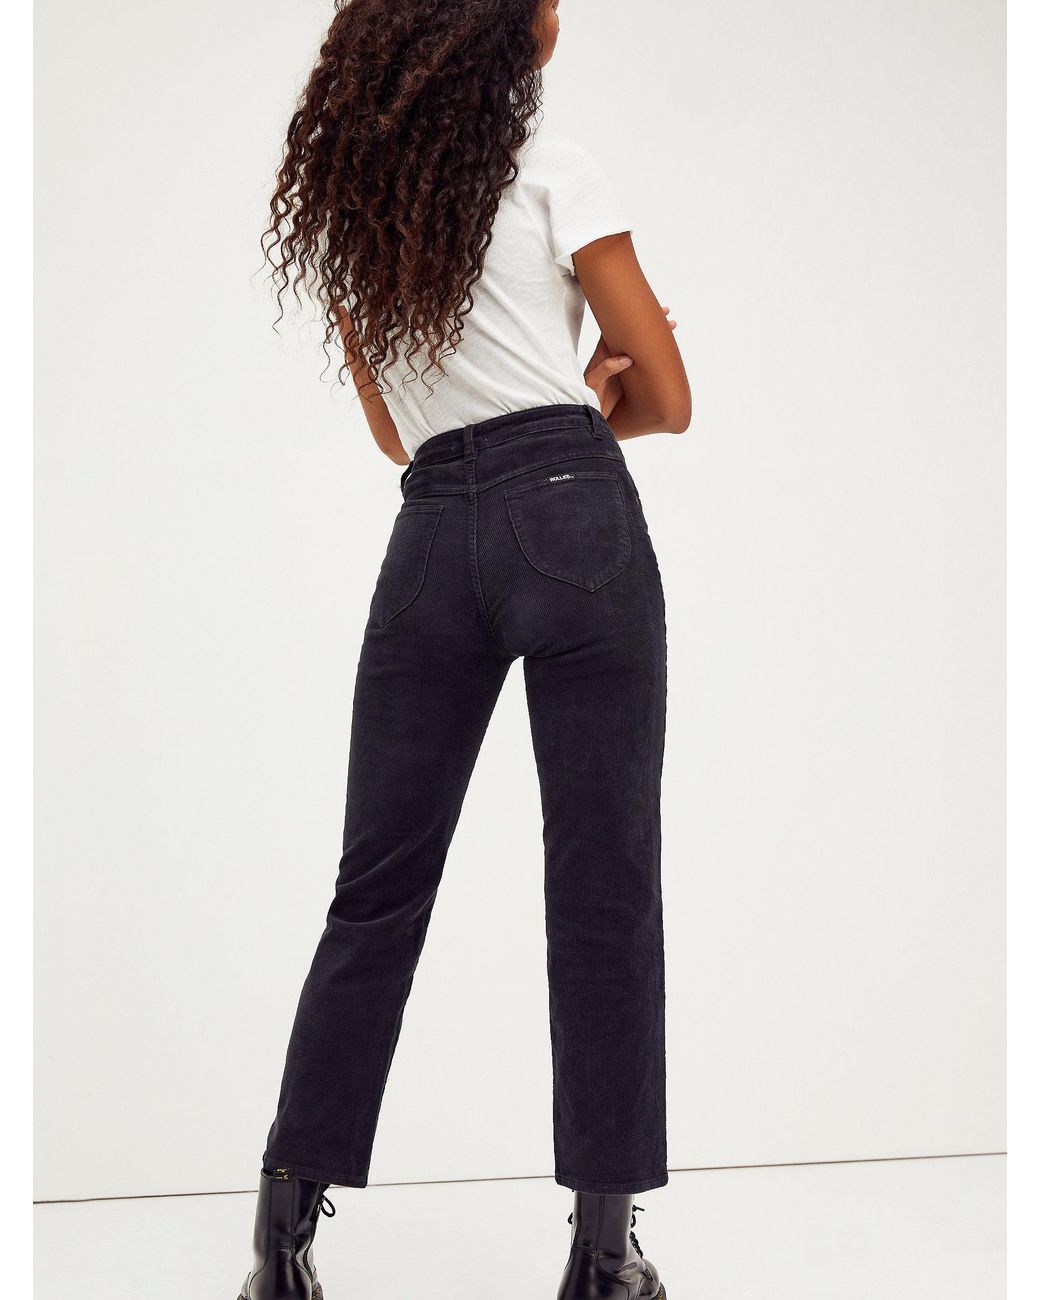 Free People Rolla's Original Straight Cord Jeans in Black | Lyst Canada